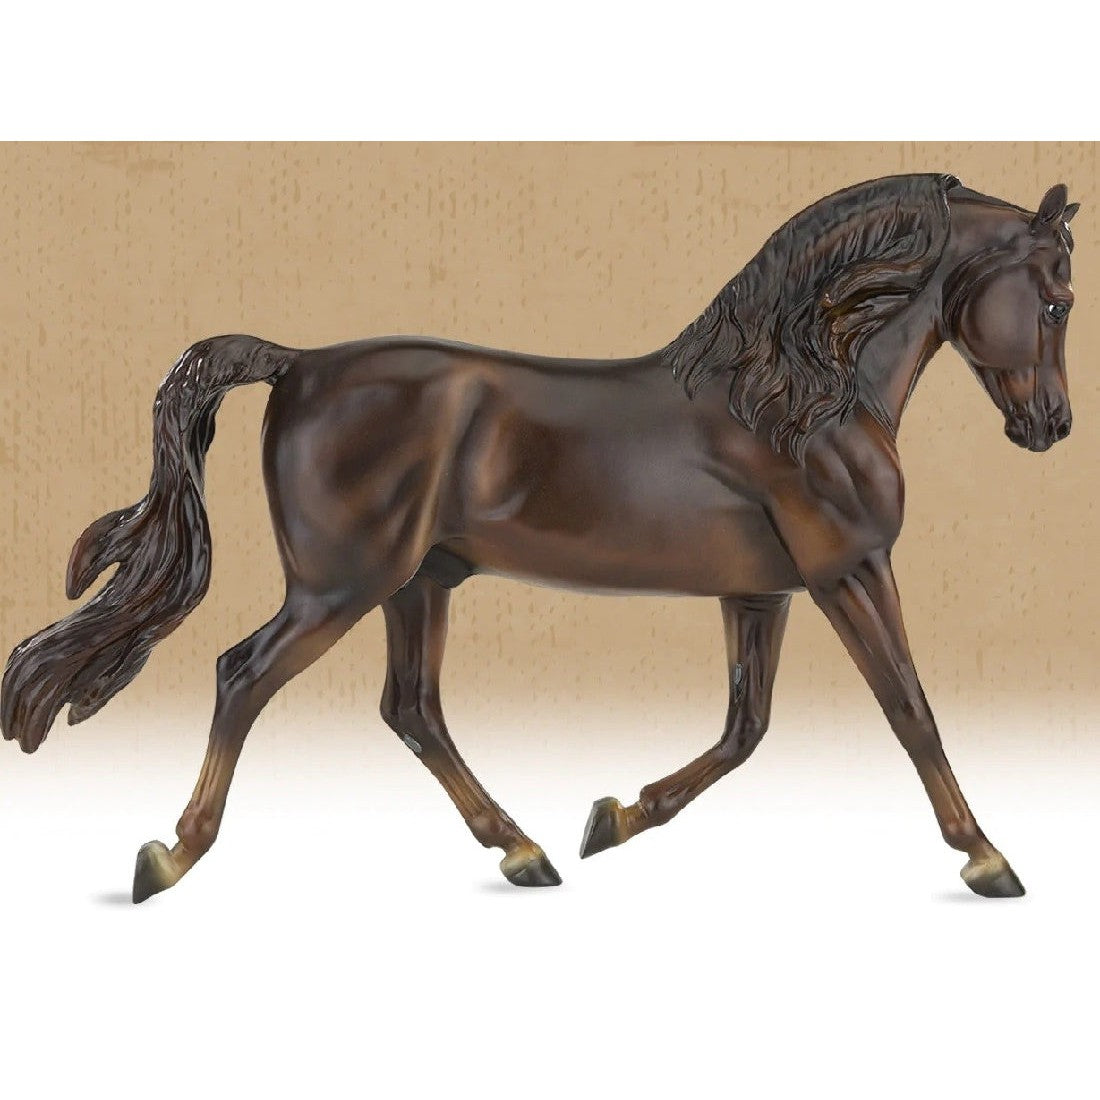 Breyer Horse Toys brown model horse with detailed mane and tail.